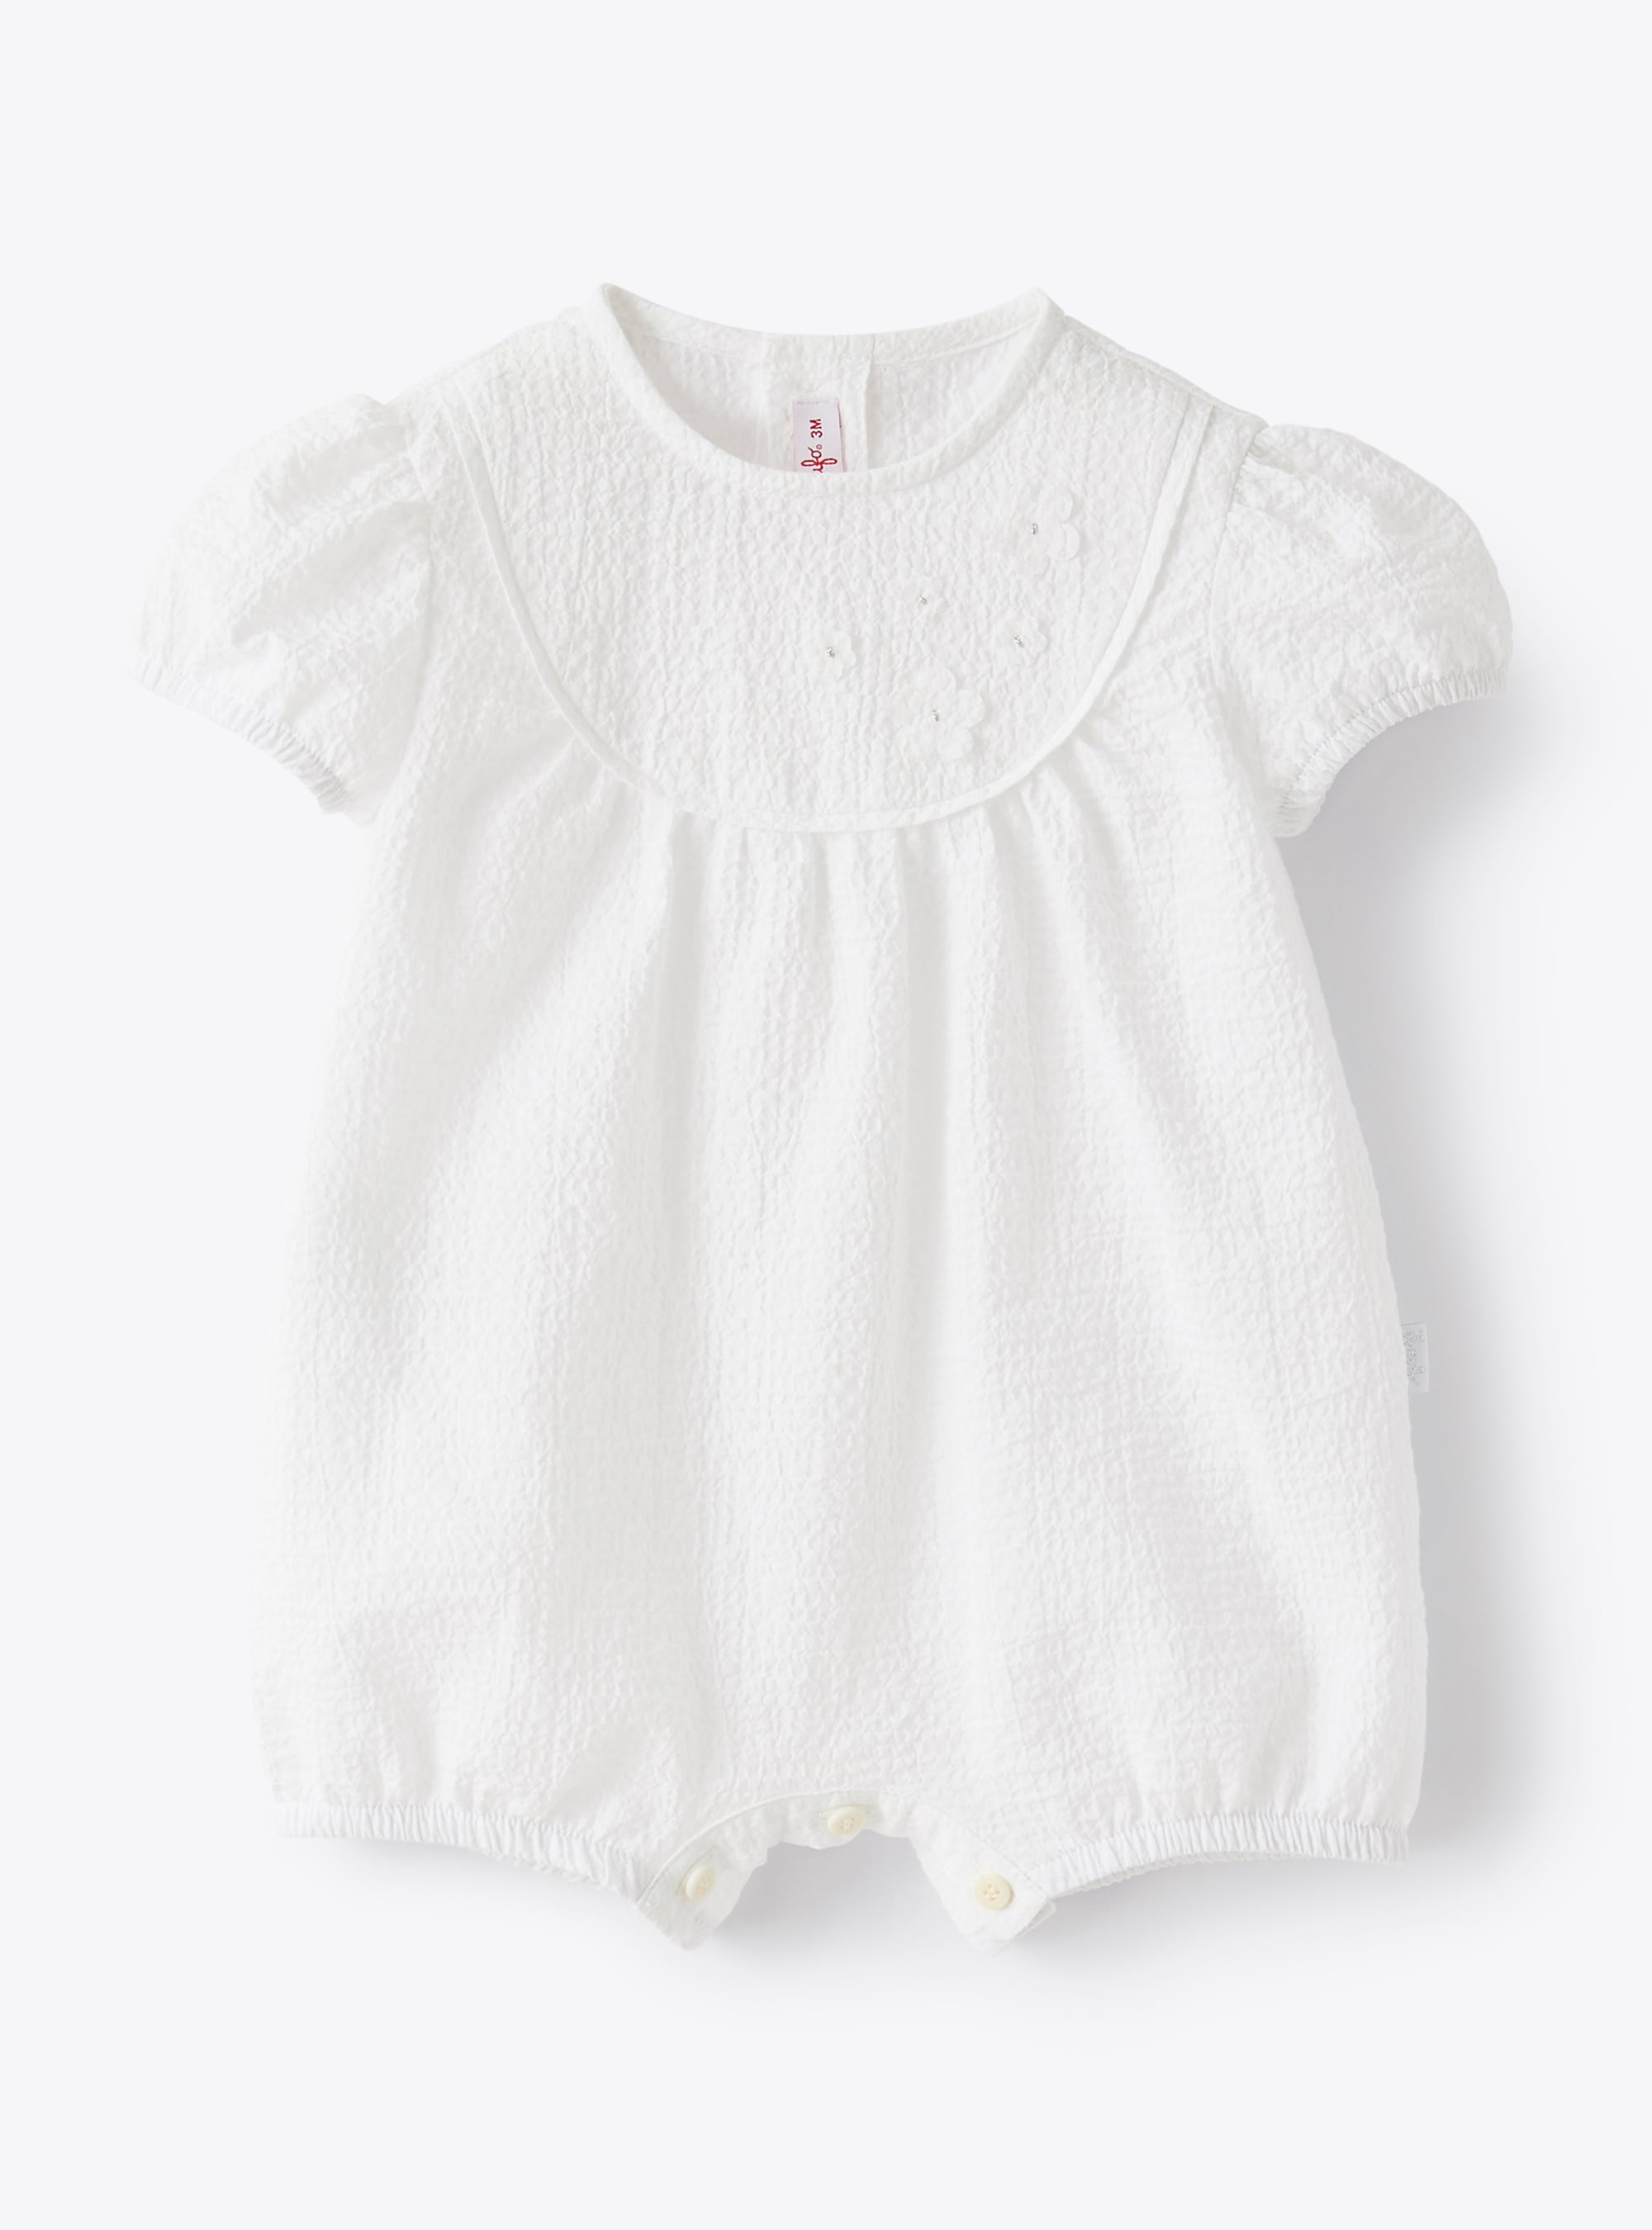 Romper suit in textured cotton - Trousers - Il Gufo